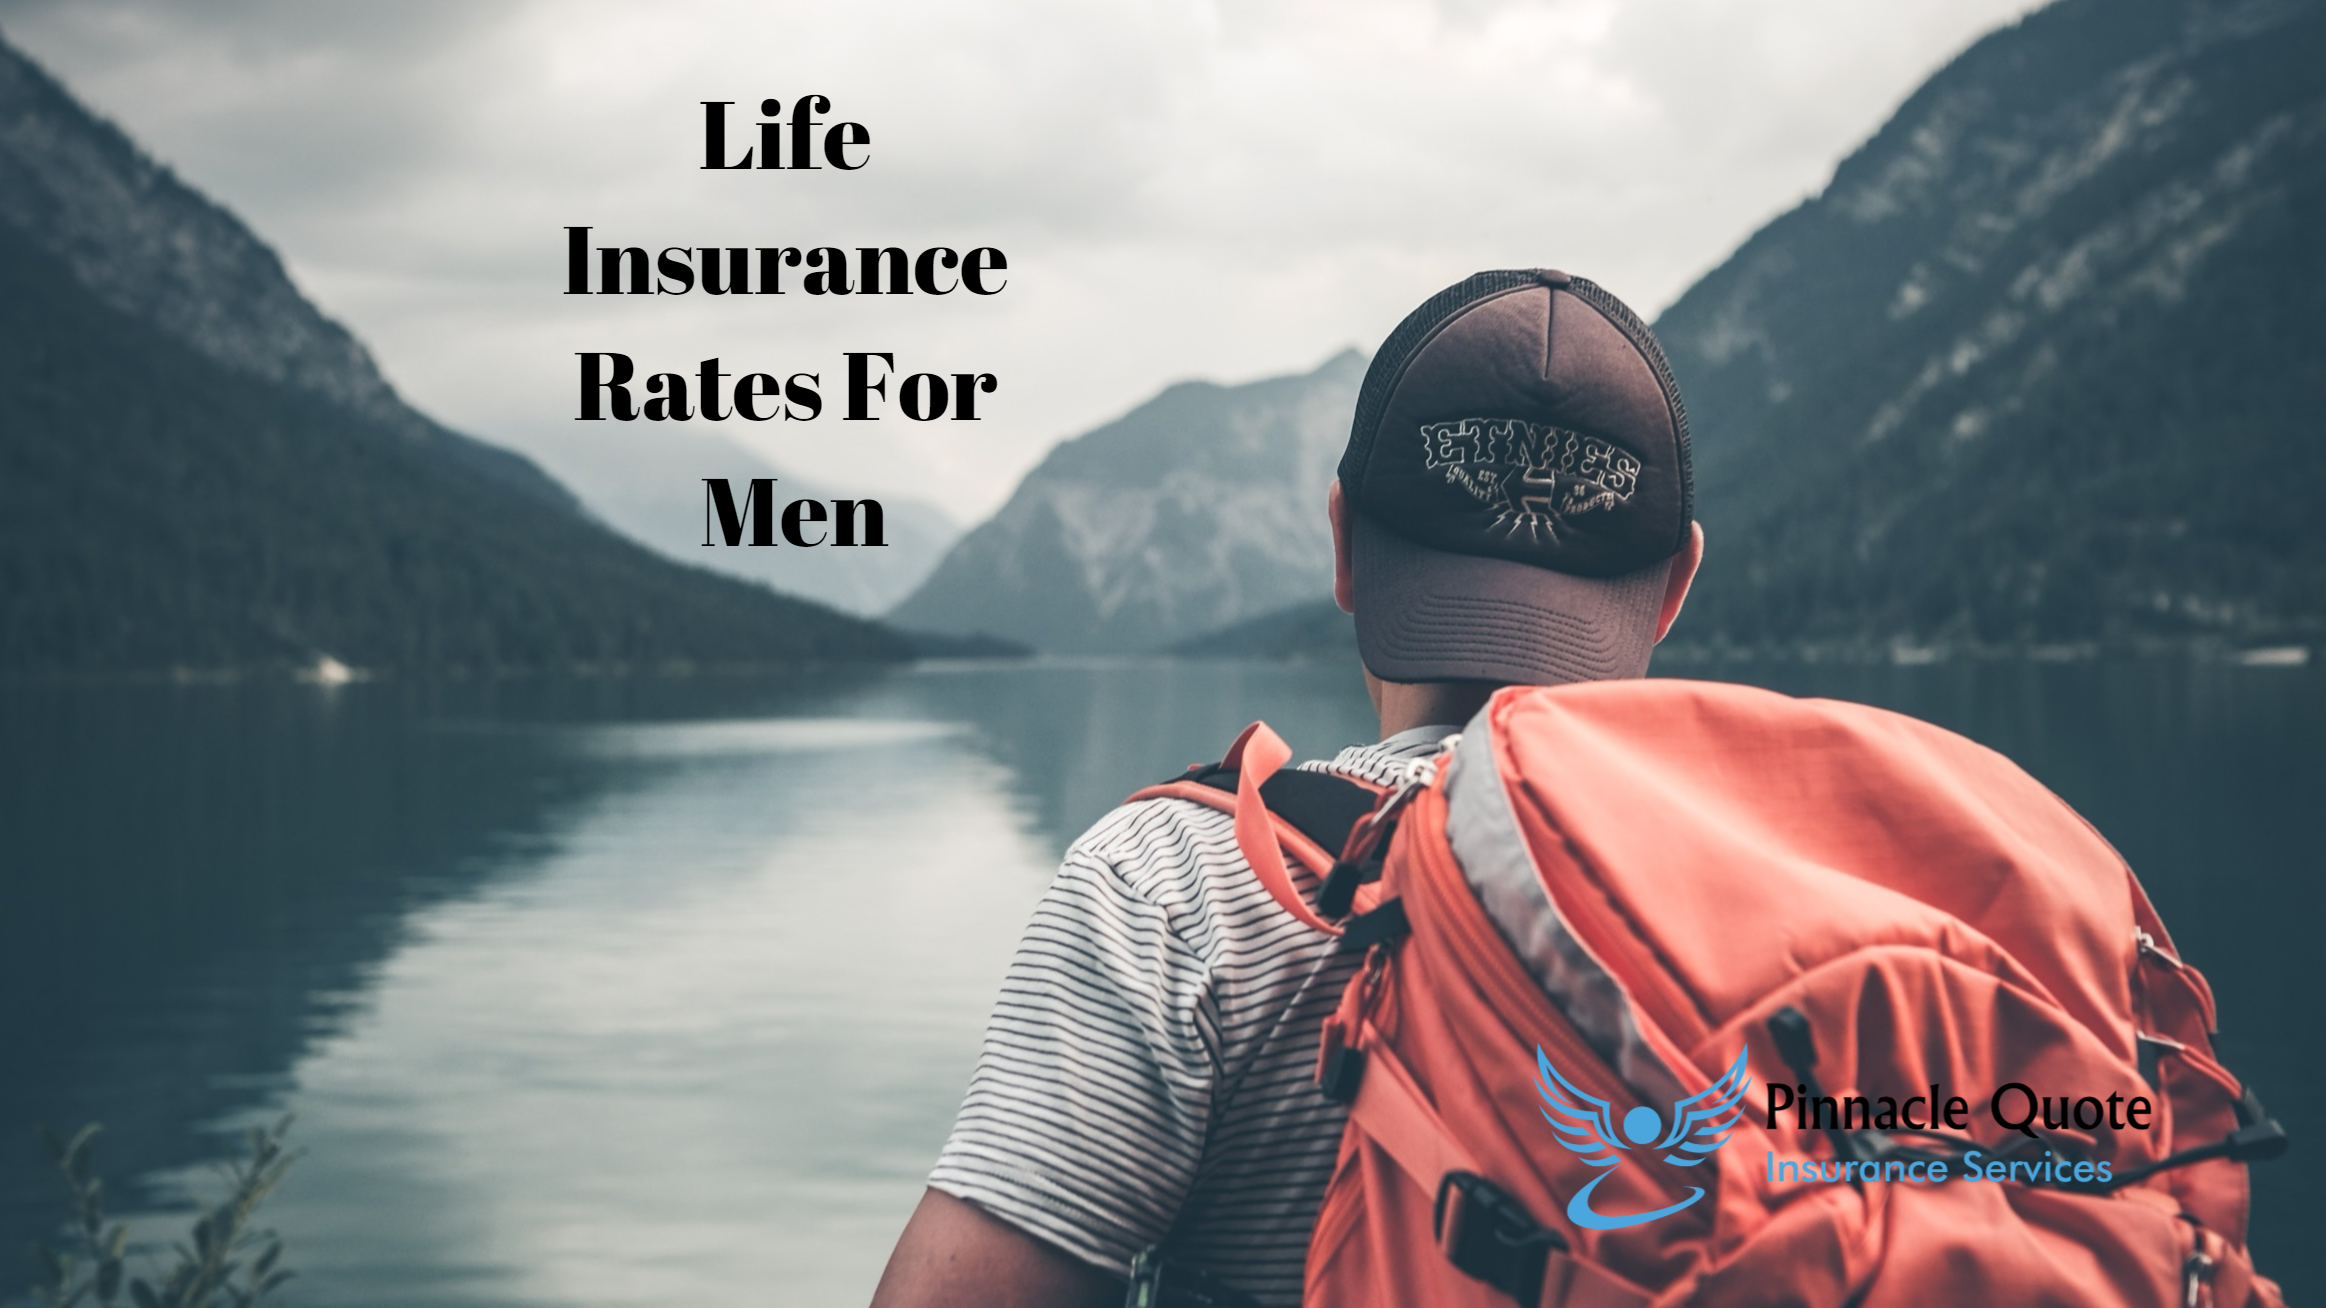 Life insurance for males